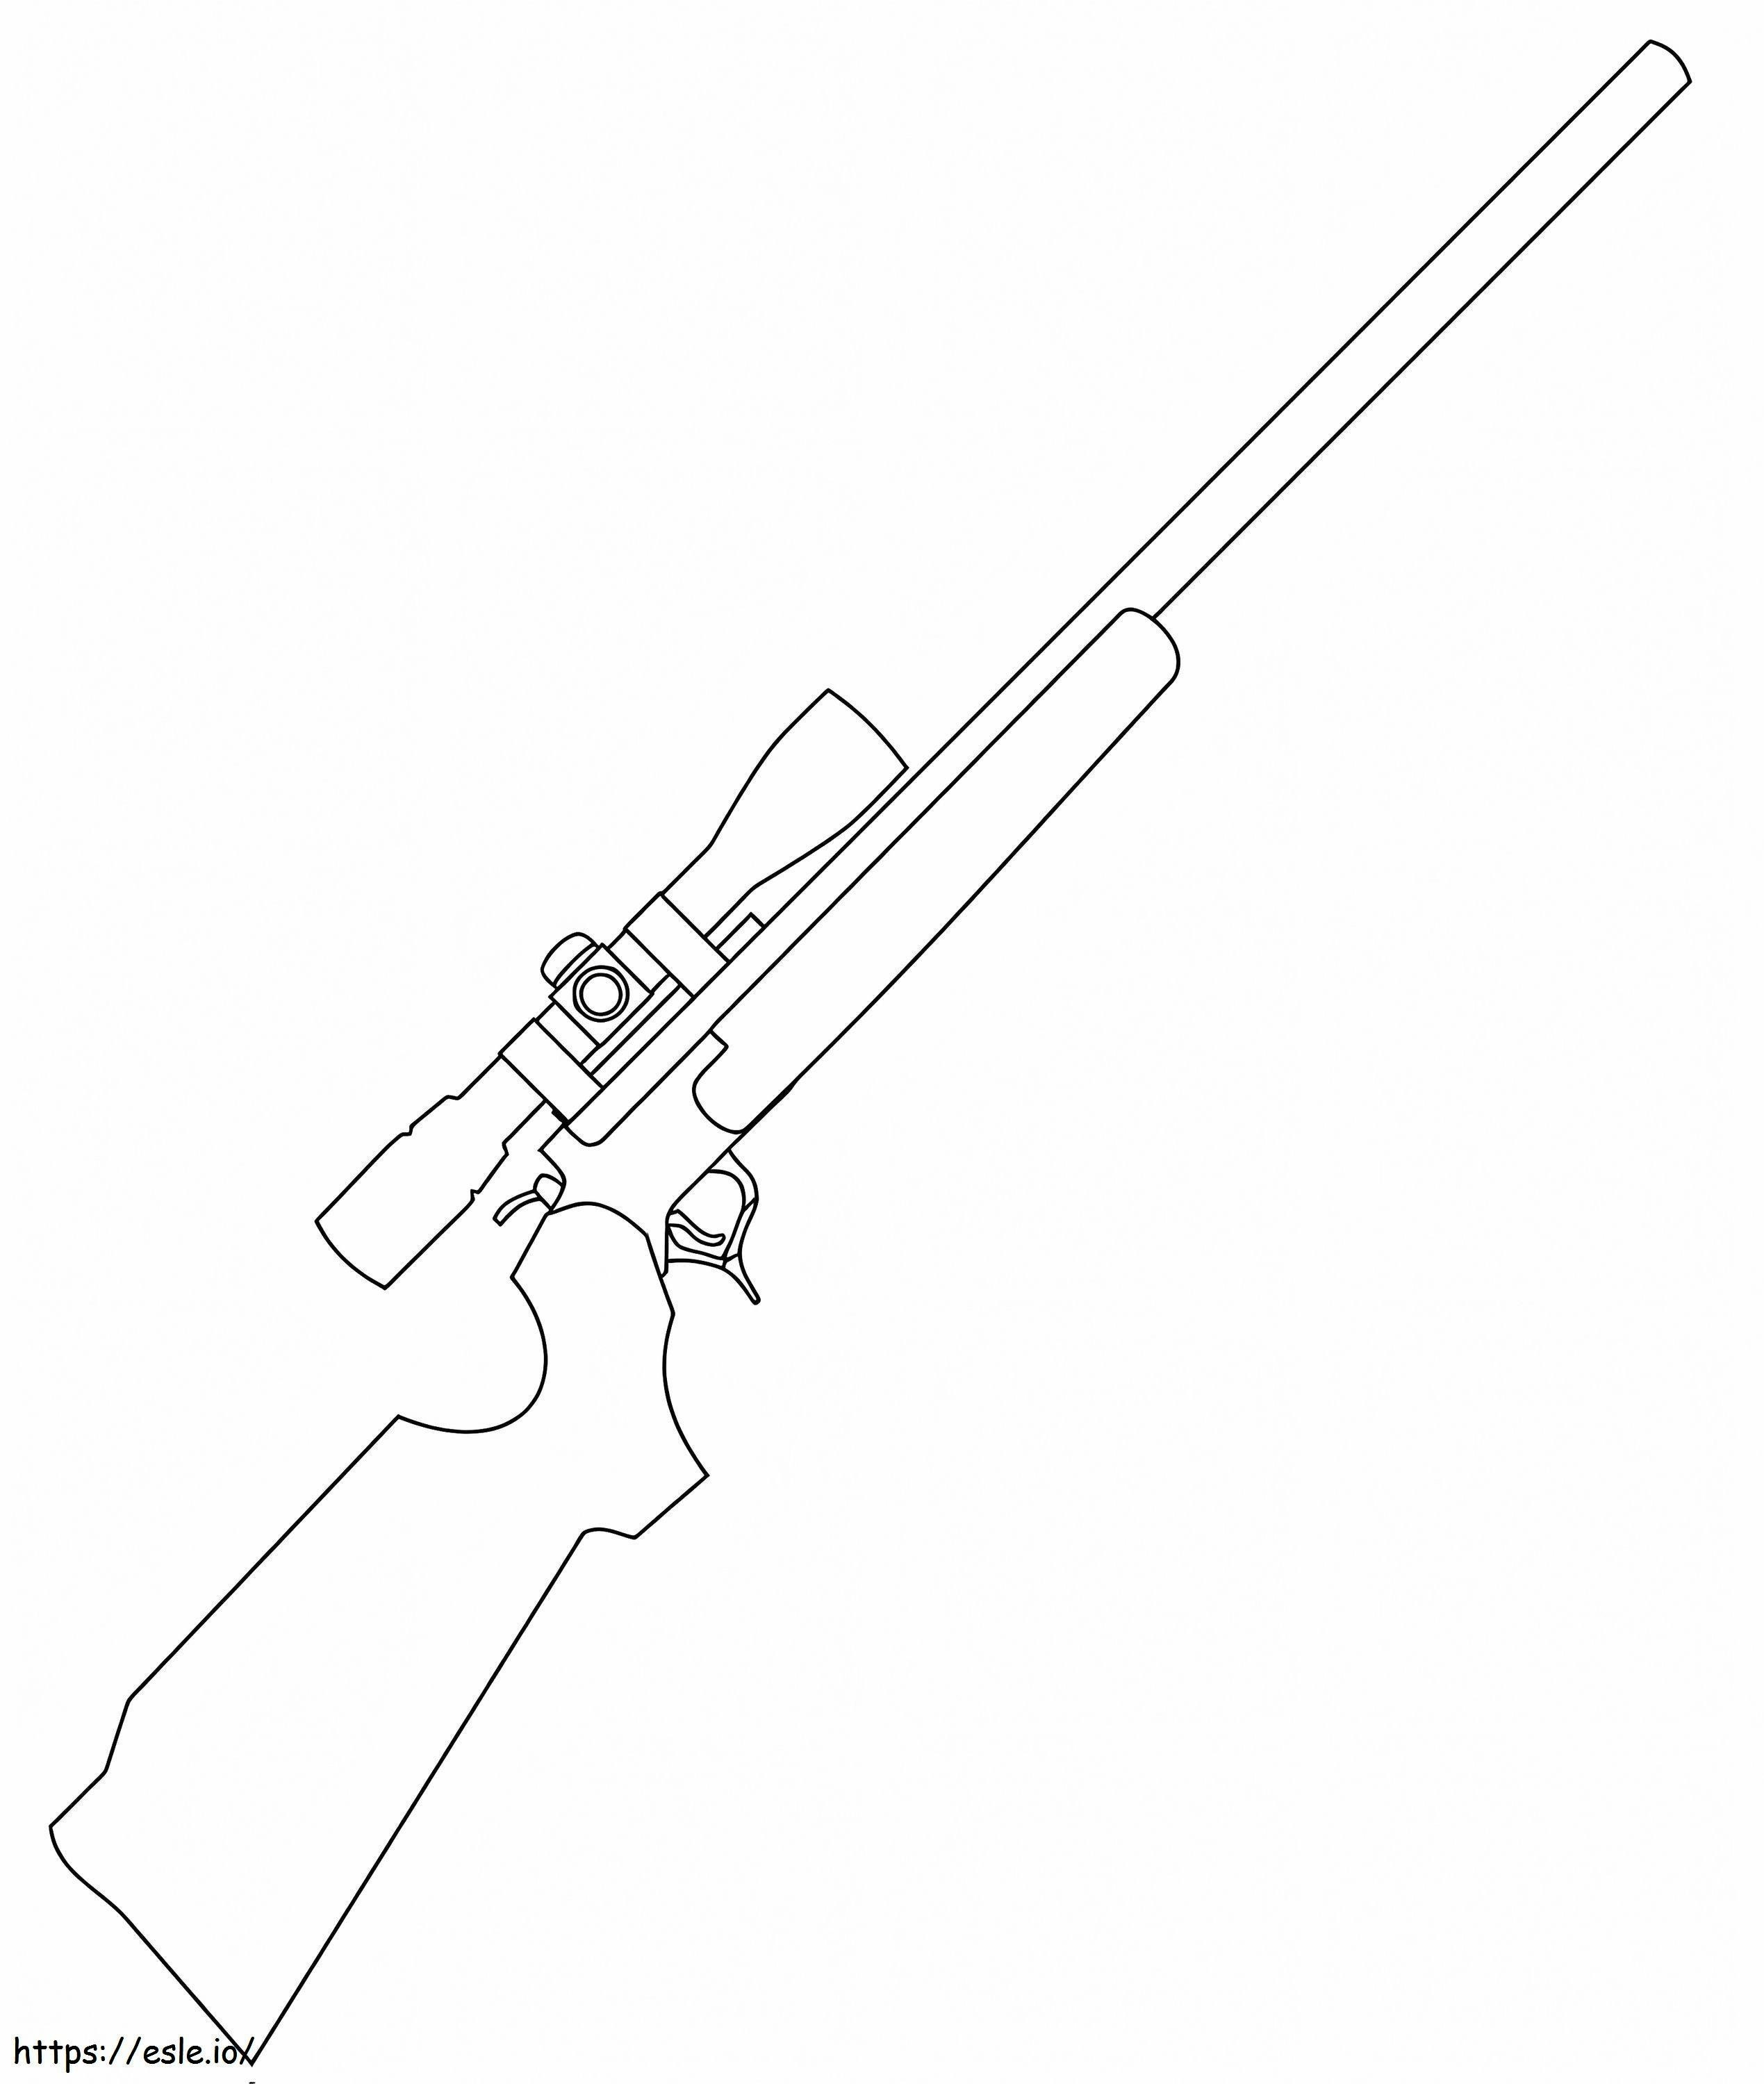 Sniper Rifle coloring page